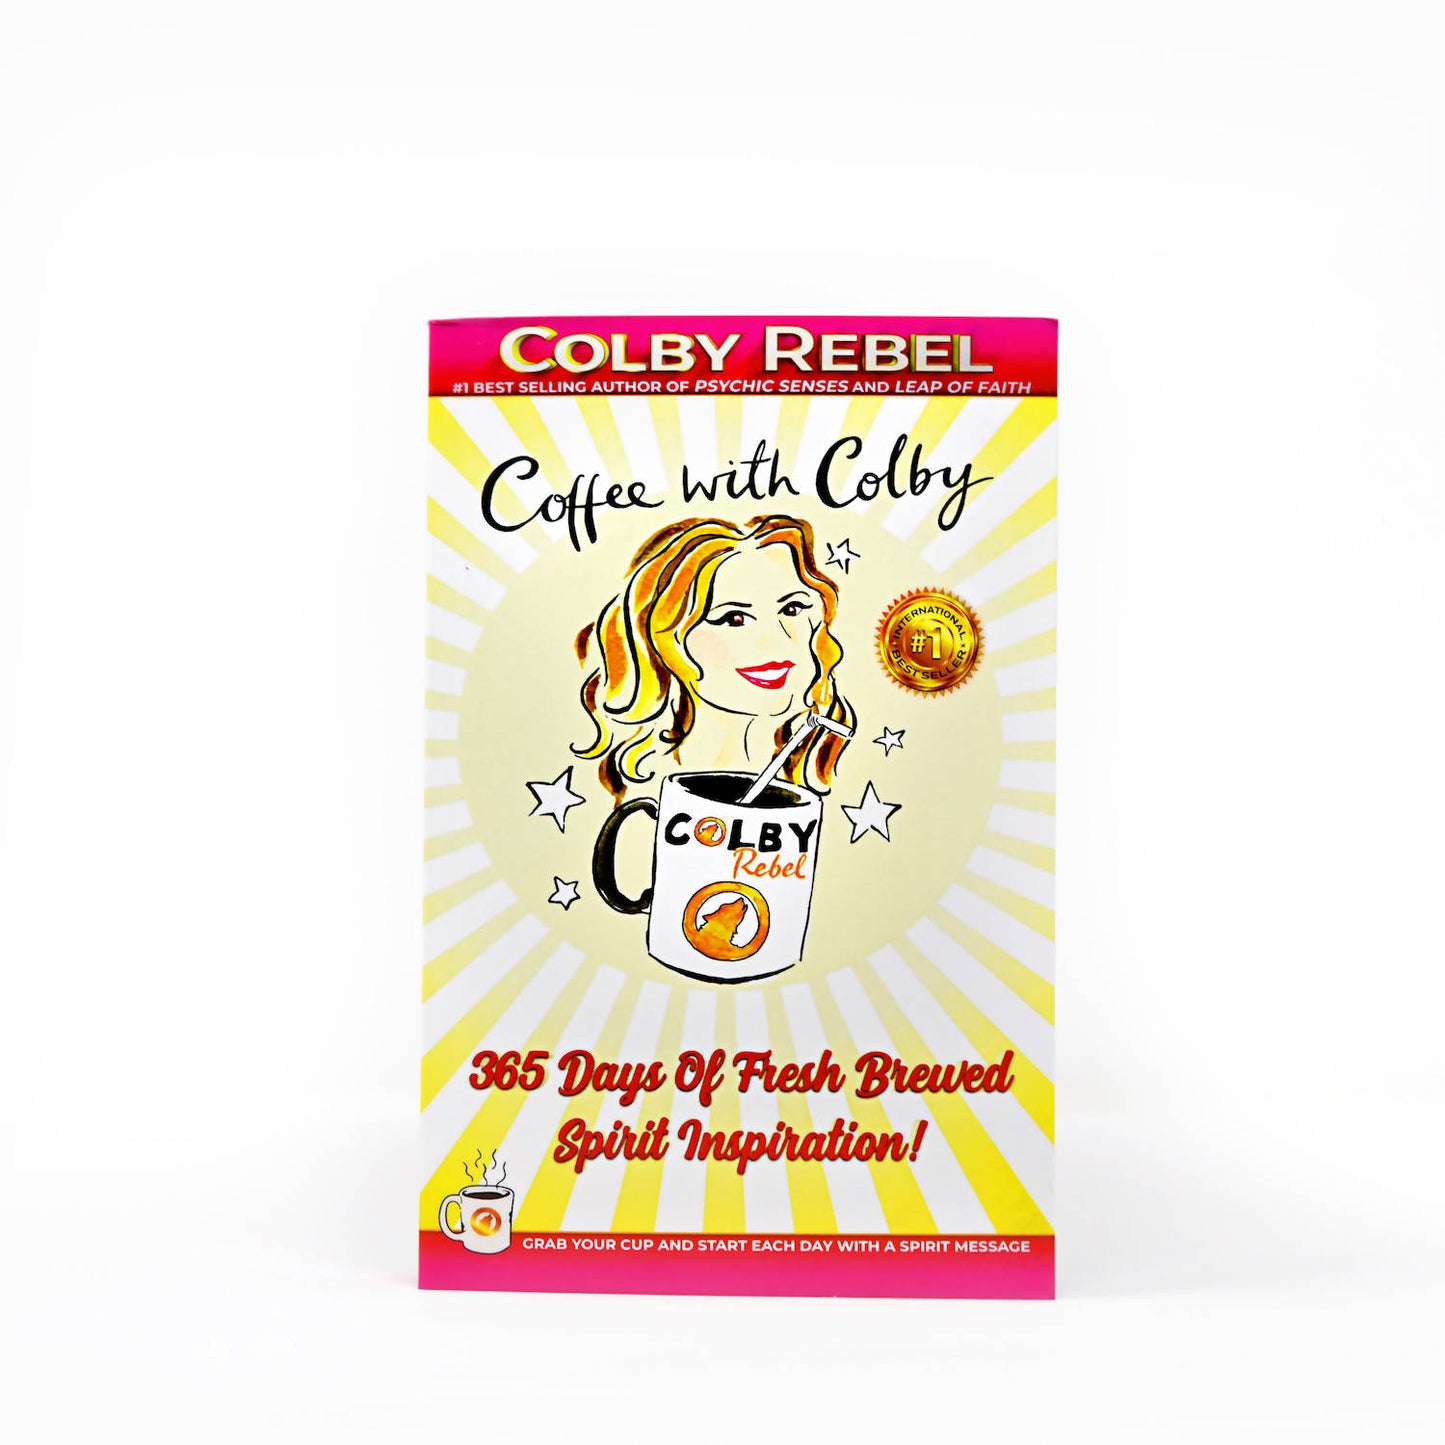 Coffee with Colby: 365 Days of Spirit Inspiration